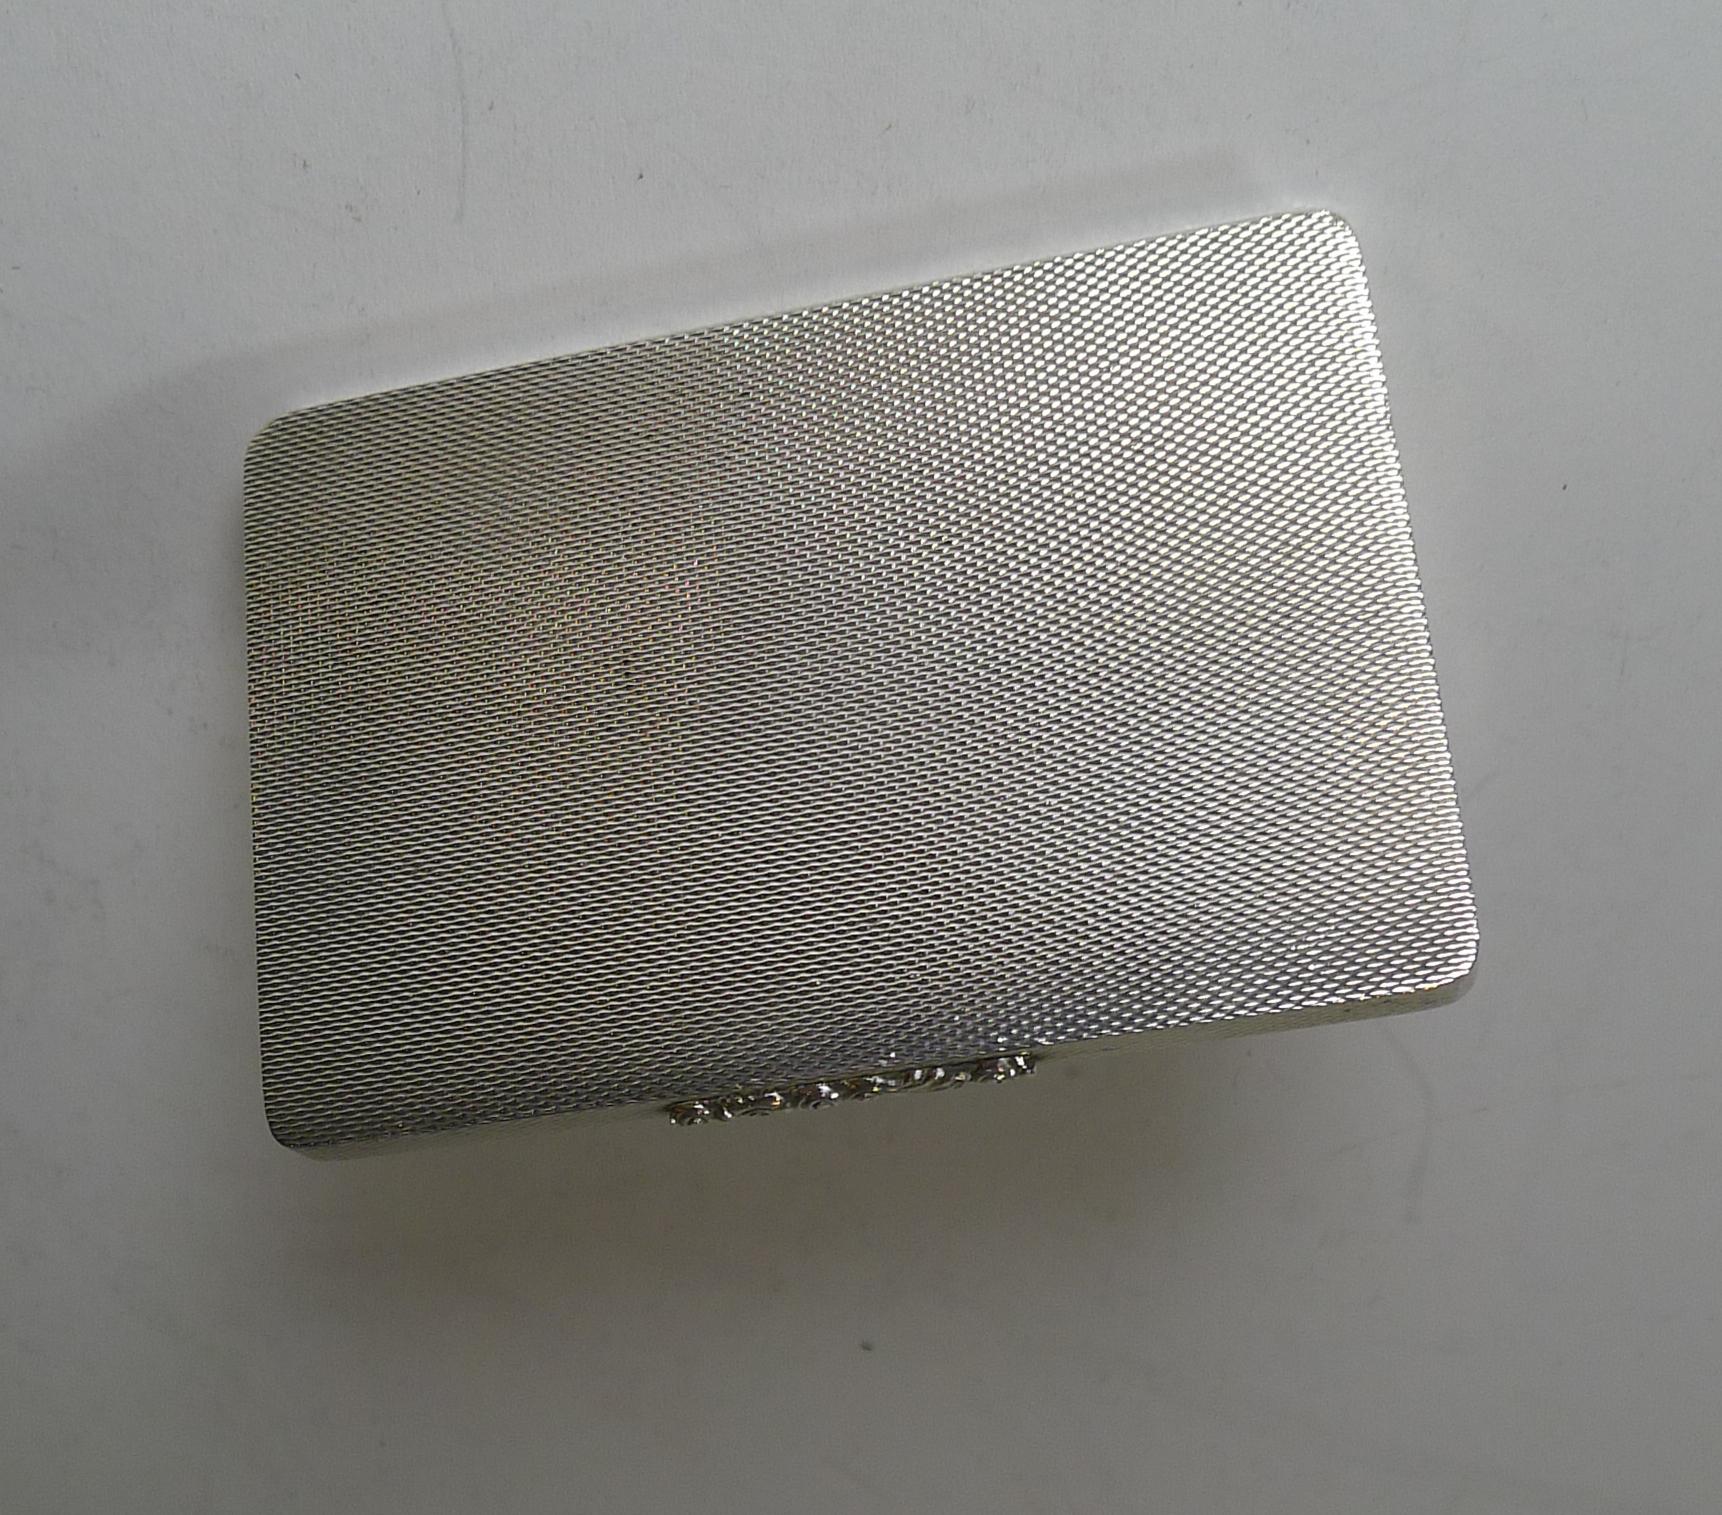 Quality English Sterling Silver Pill / Snuff Box 1946 In Good Condition For Sale In Bath, GB